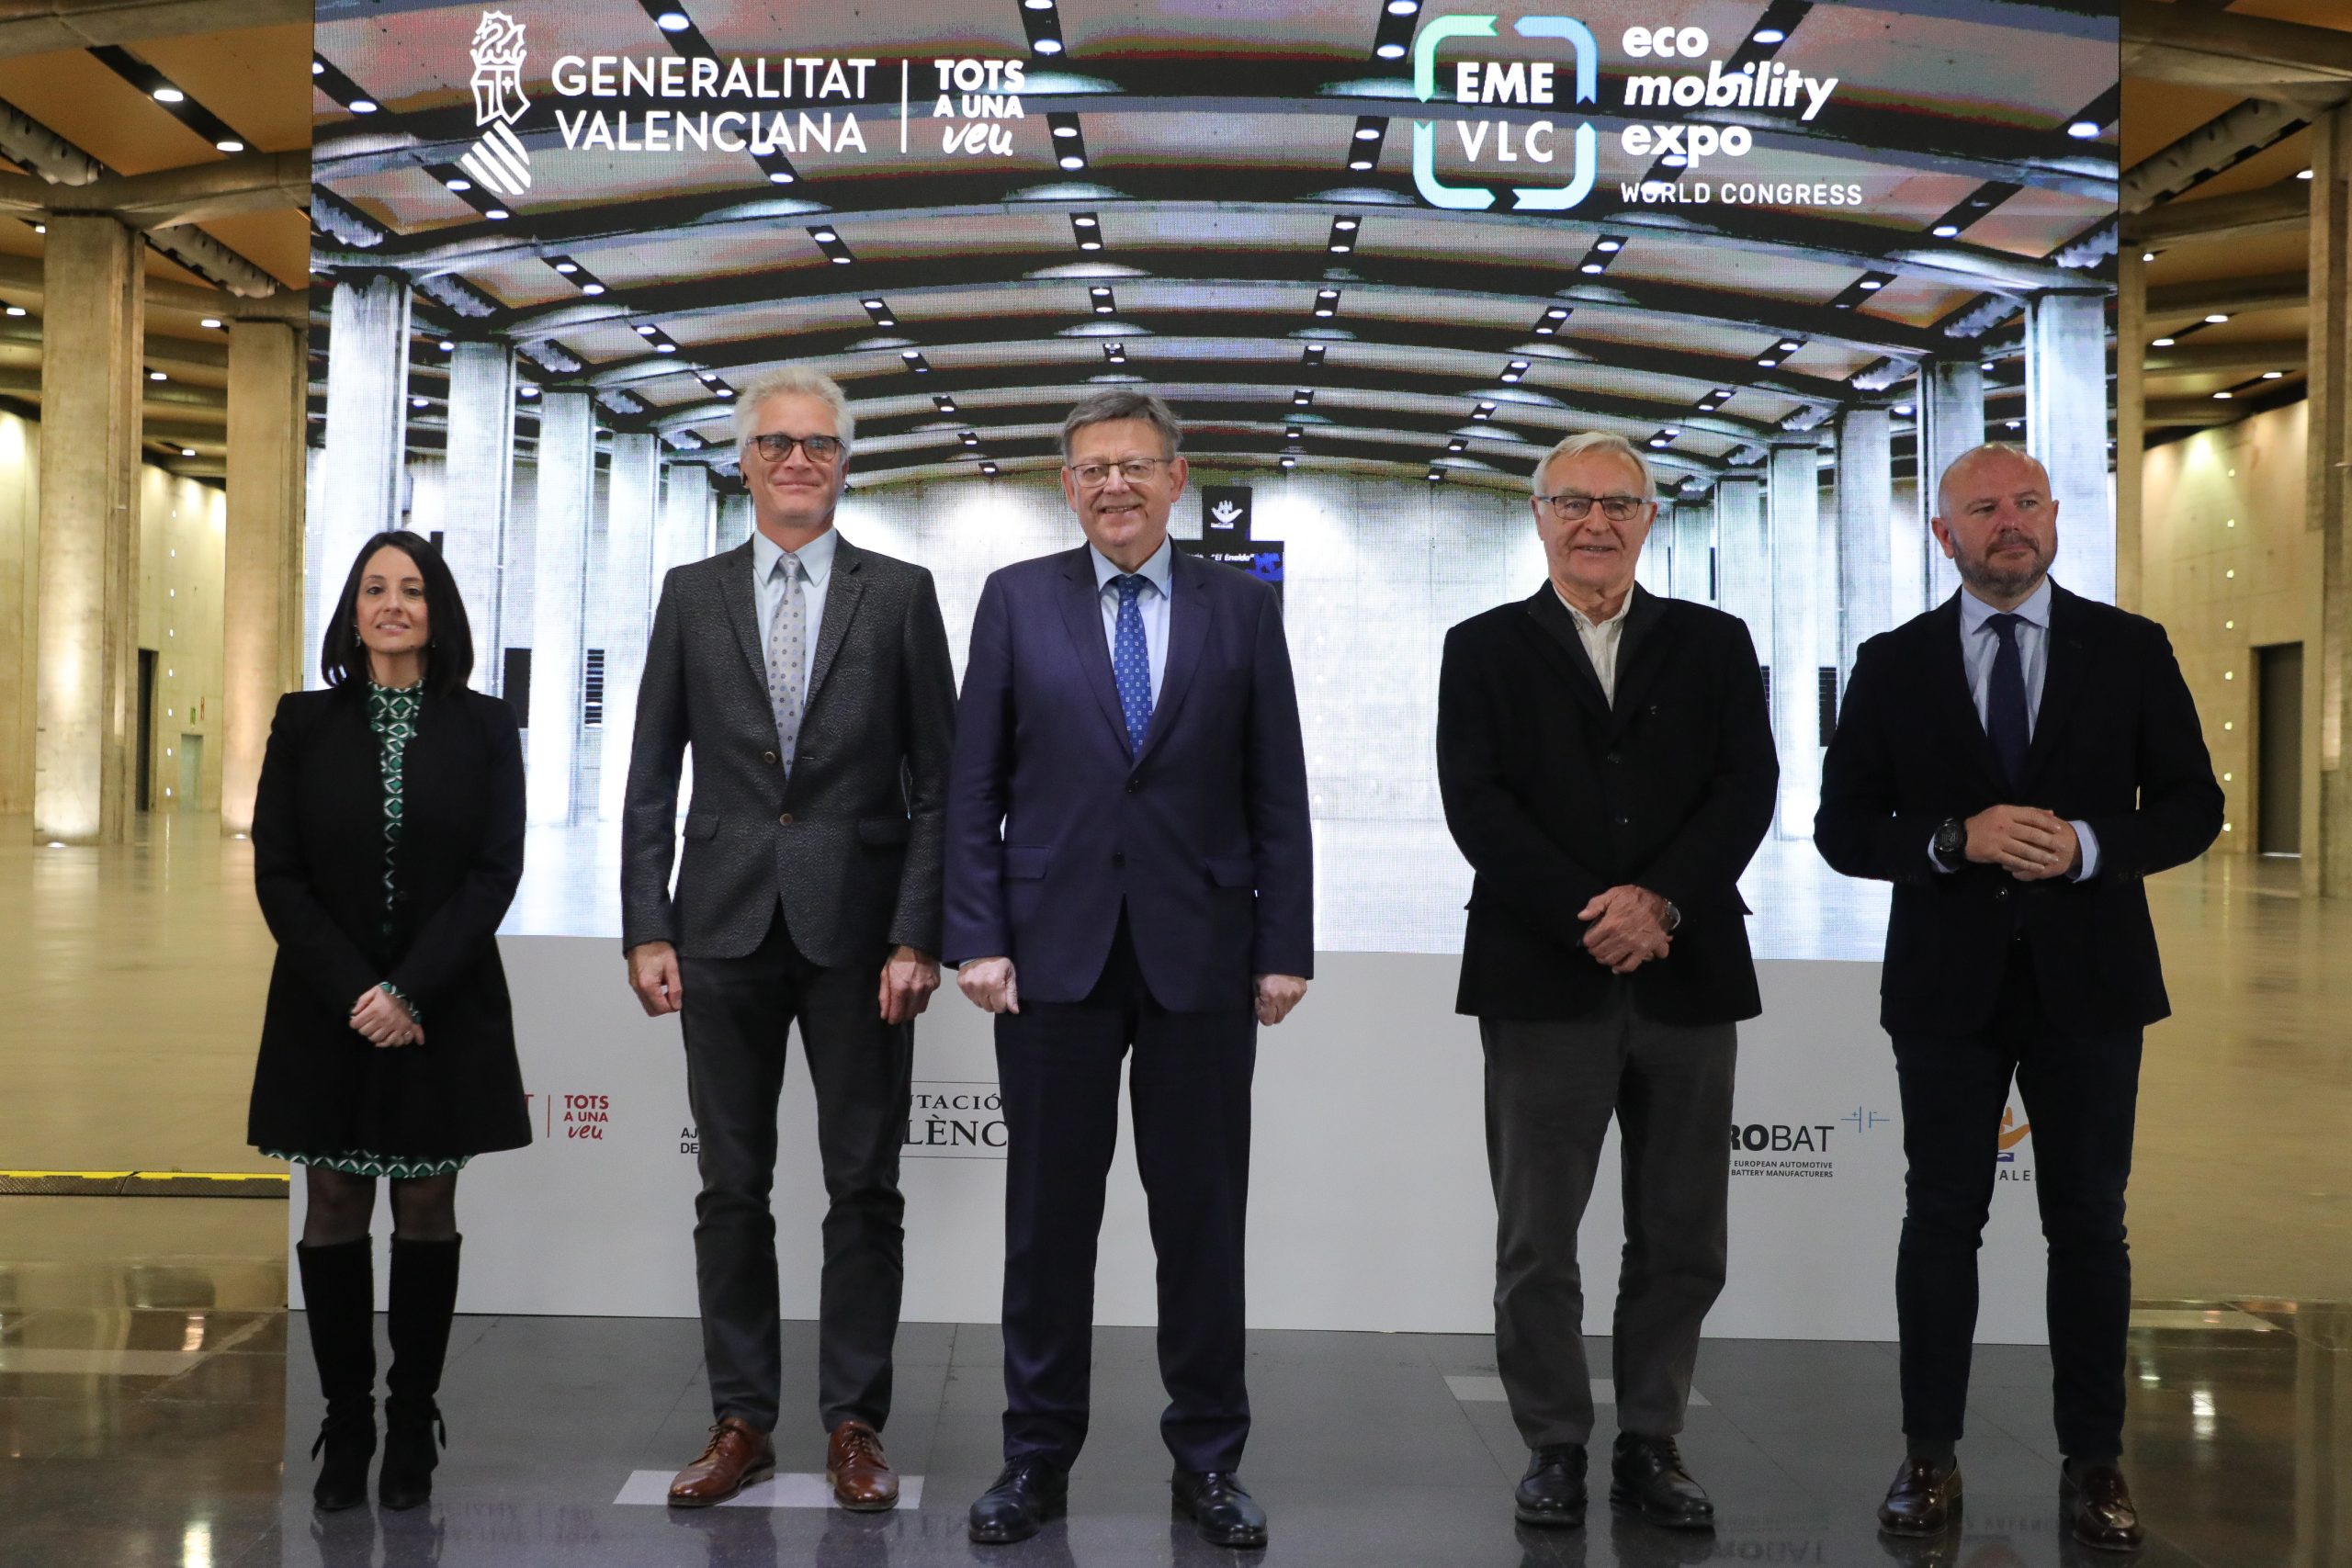 Valencia will host eMobility Expo World Congress 2023 in March, the largest international innovation event for the sustainable mobility industry